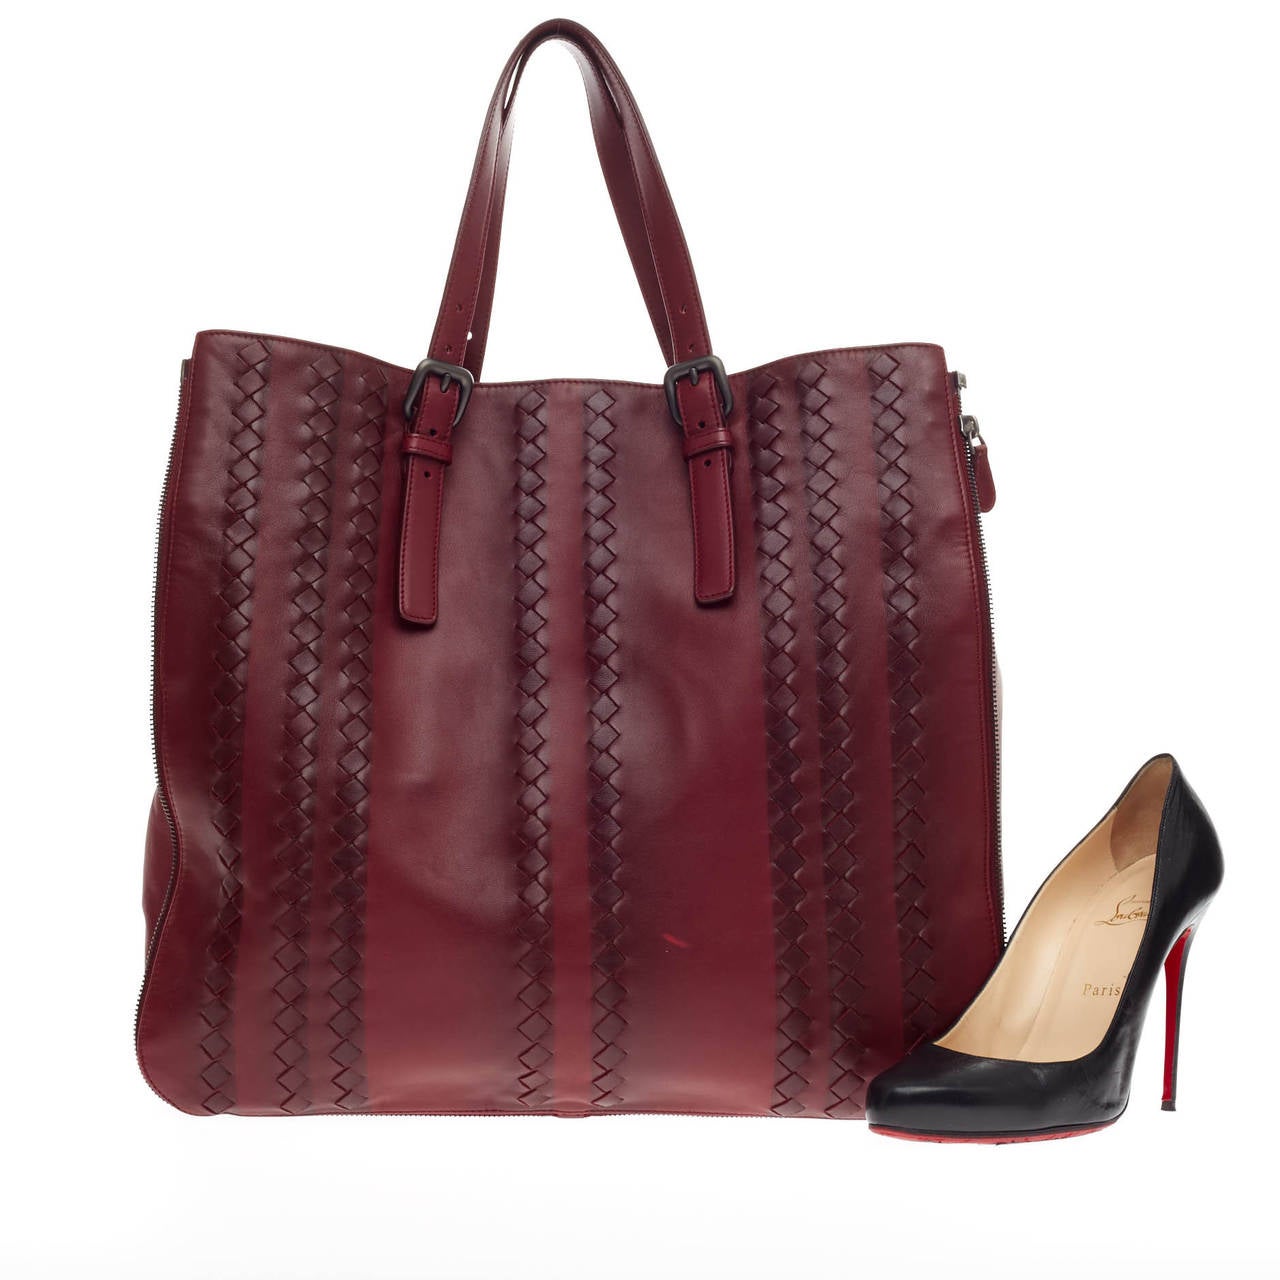 This authentic Bottega Veneta Expandable Zip Around Tote Leather with Intrecciato Detail exudes elegant functionality and understated luxury synonymous to the brand. Crafted from burgundy calf leather with Bottega Veneta's signature intrecciato